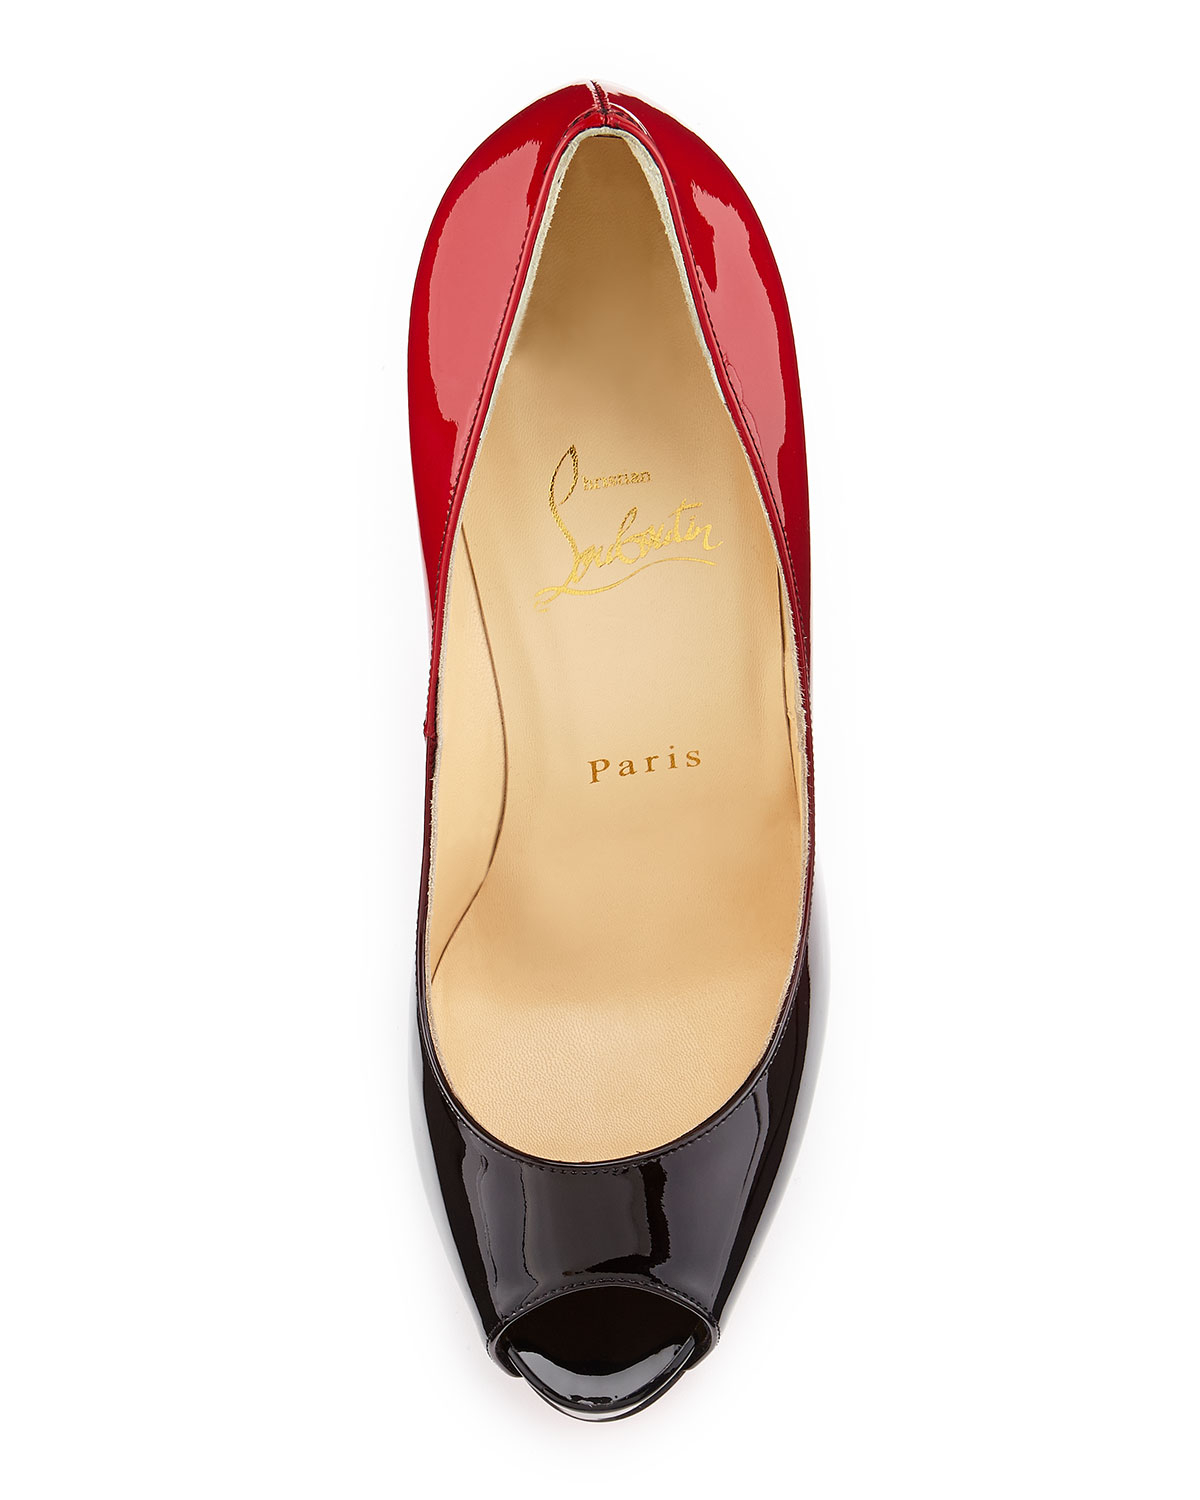 Christian louboutin New Very Prive Ombre Peep-toe Red Sole Pump in ...